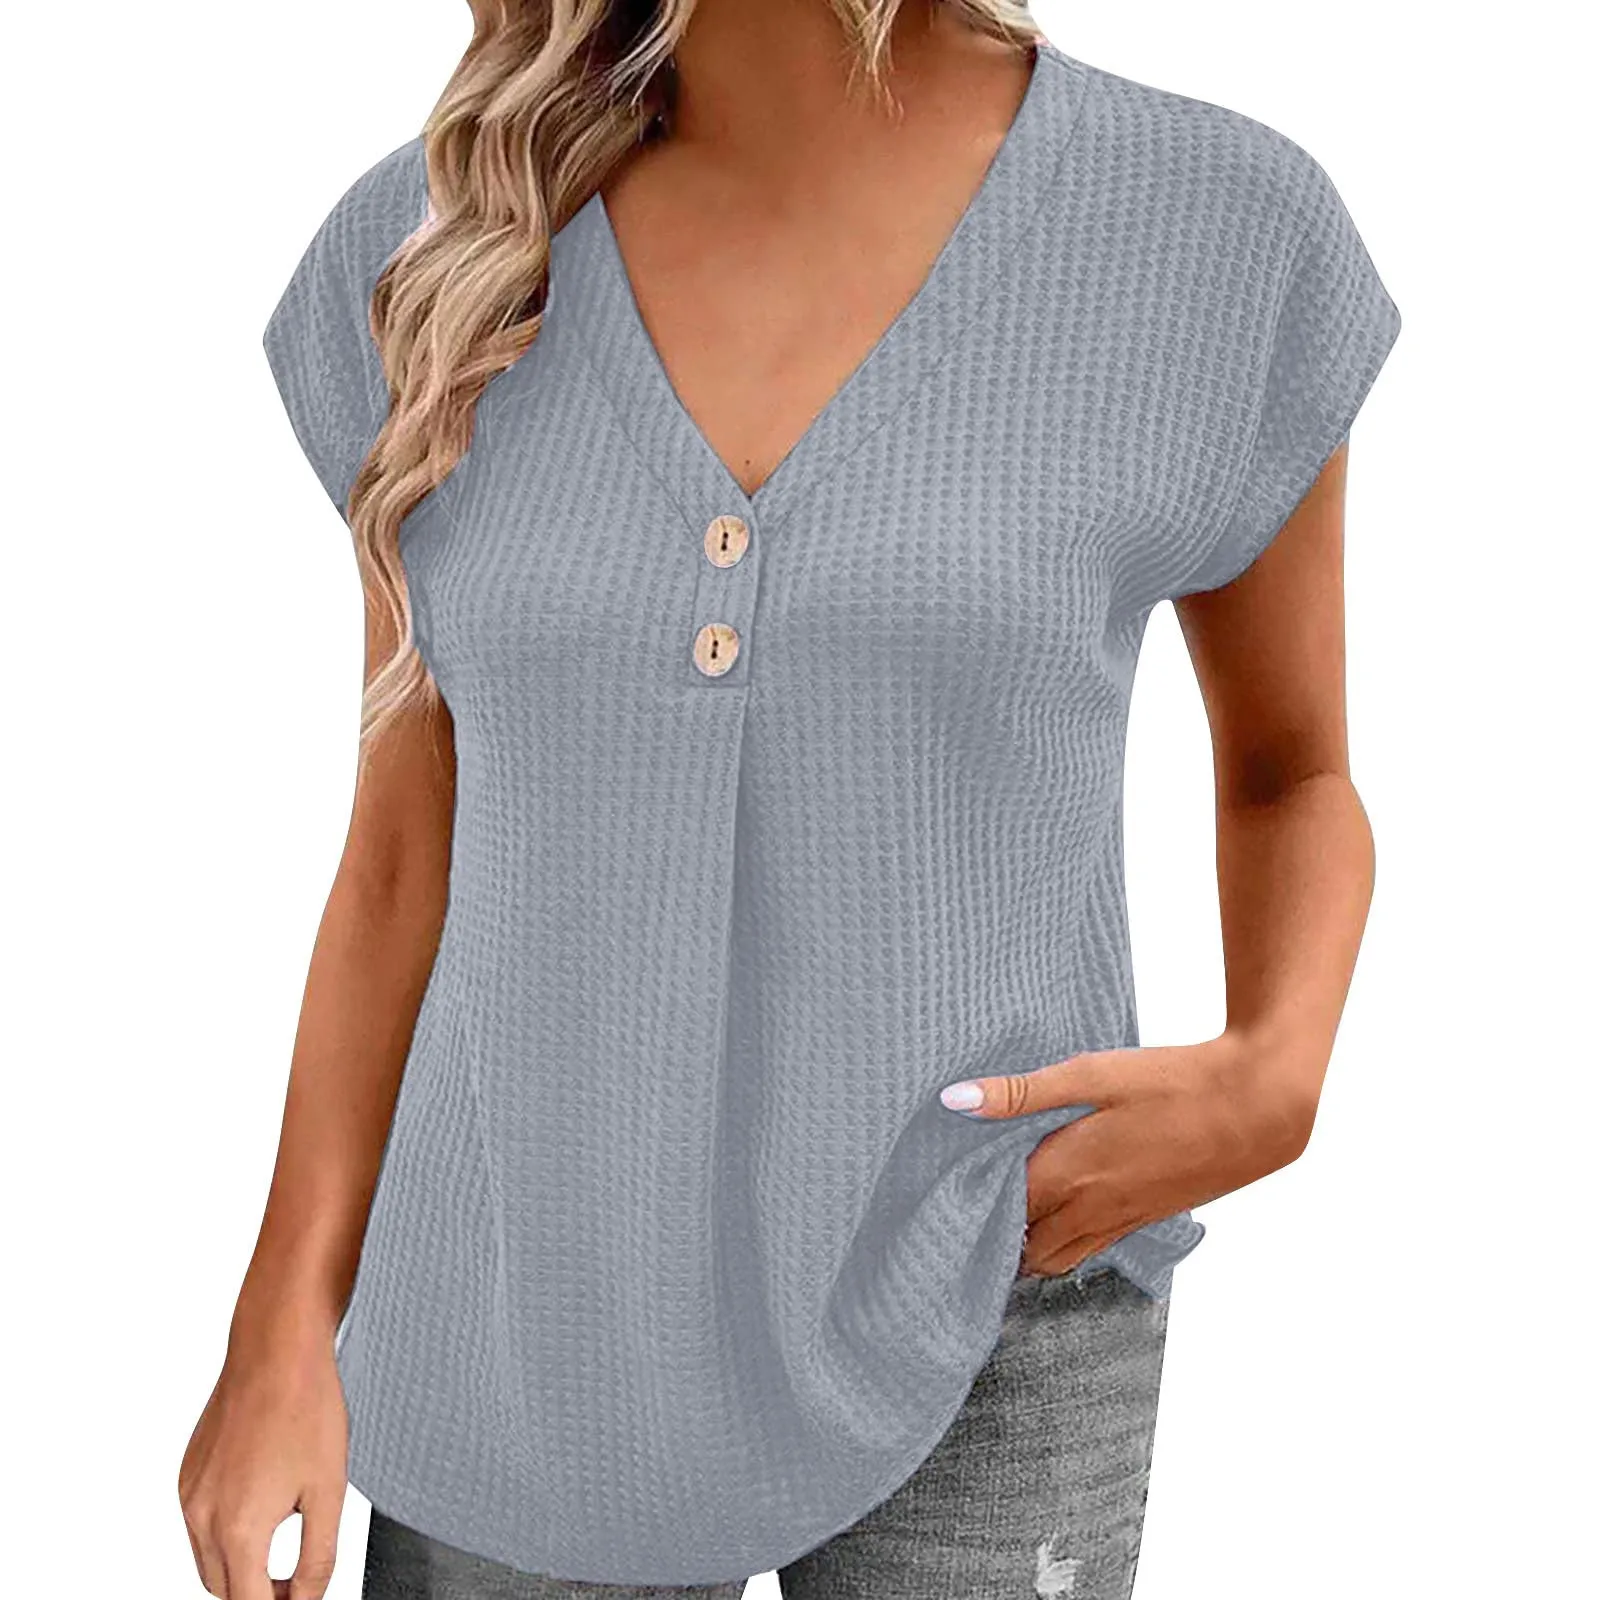 

Women's Fashion Casual Solid Color V-Neck Button Short Sleeve T-Shirt Top кофта женская hauts grande taille camisetas femininas